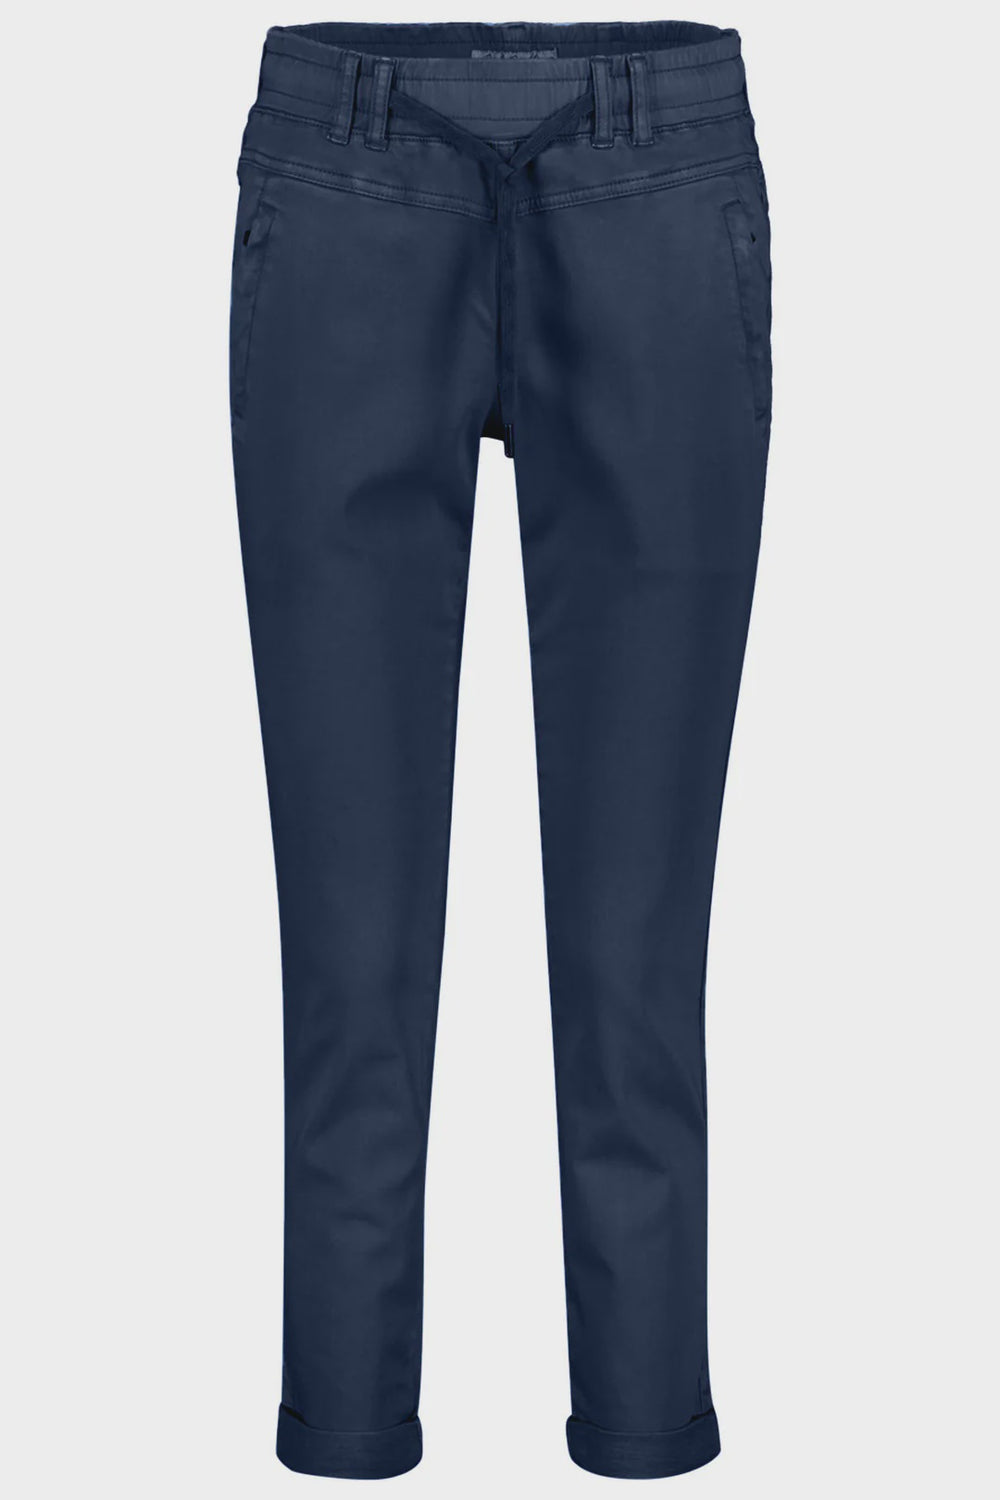 Red Button Tessy Crop Jogger - Navy